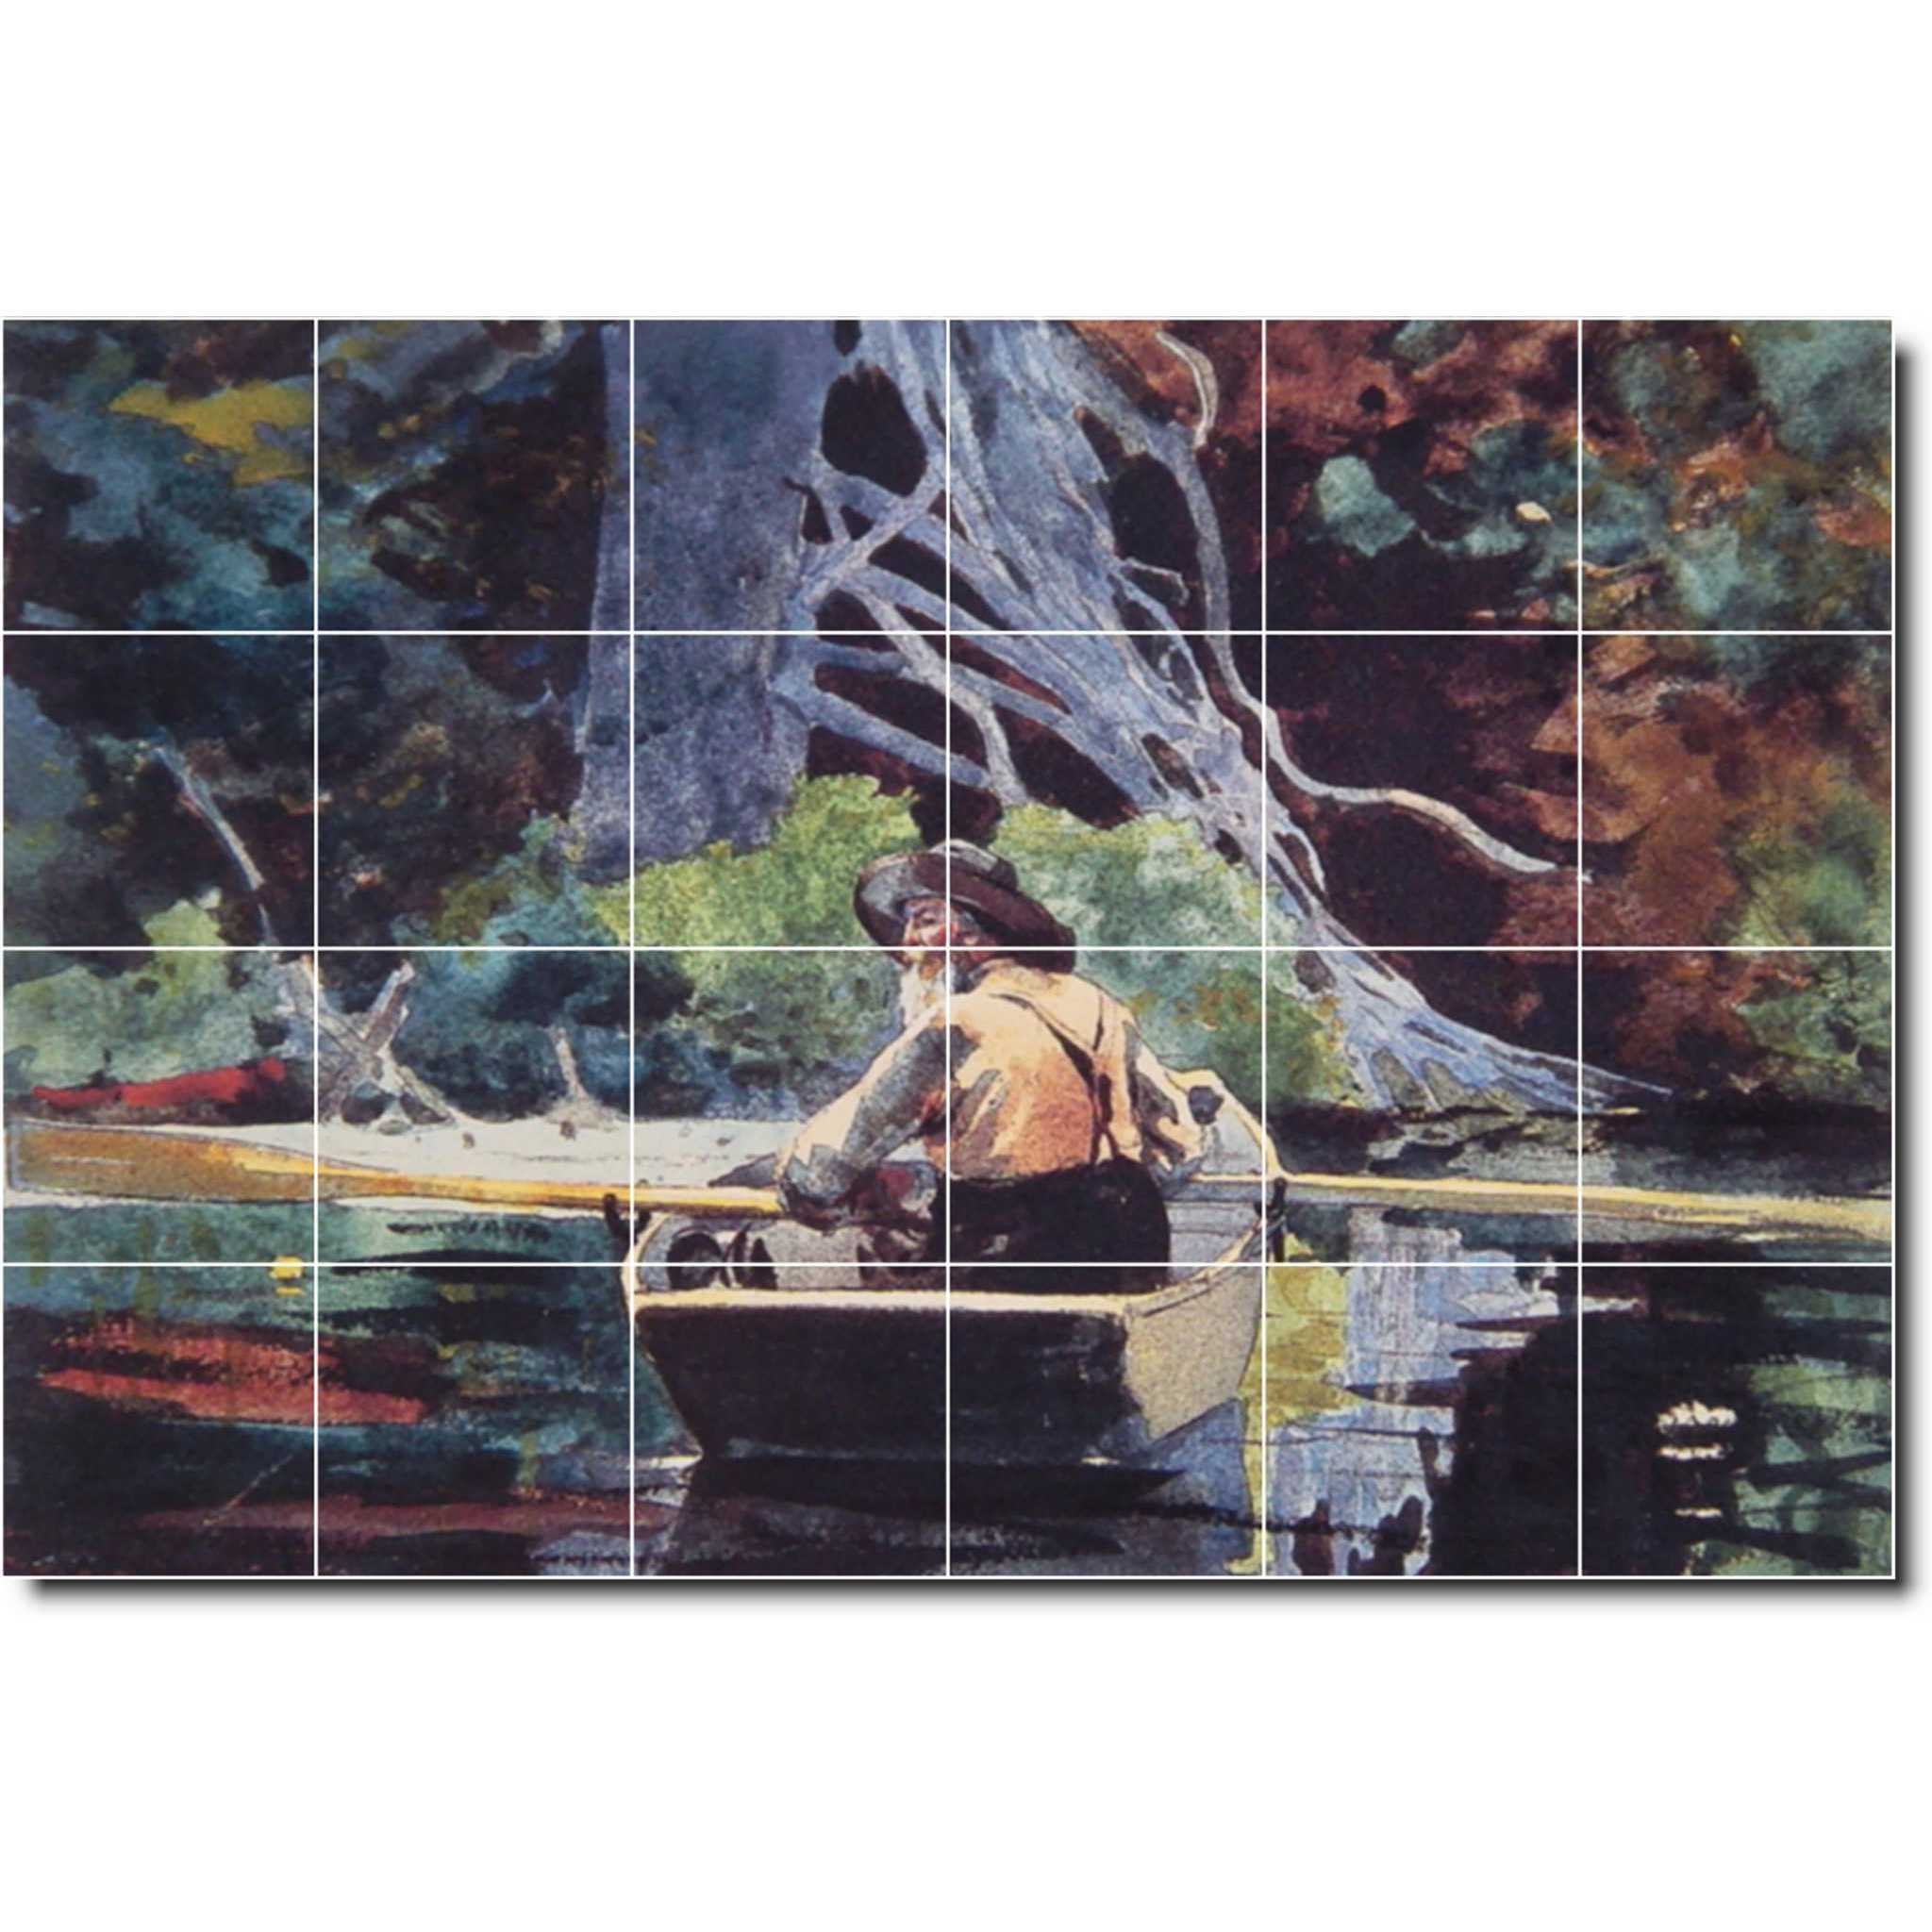 Winslow Homer Country Painting Ceramic Tile Mural P04505-XL. 72"W x 48"H (24) 12x12 tiles